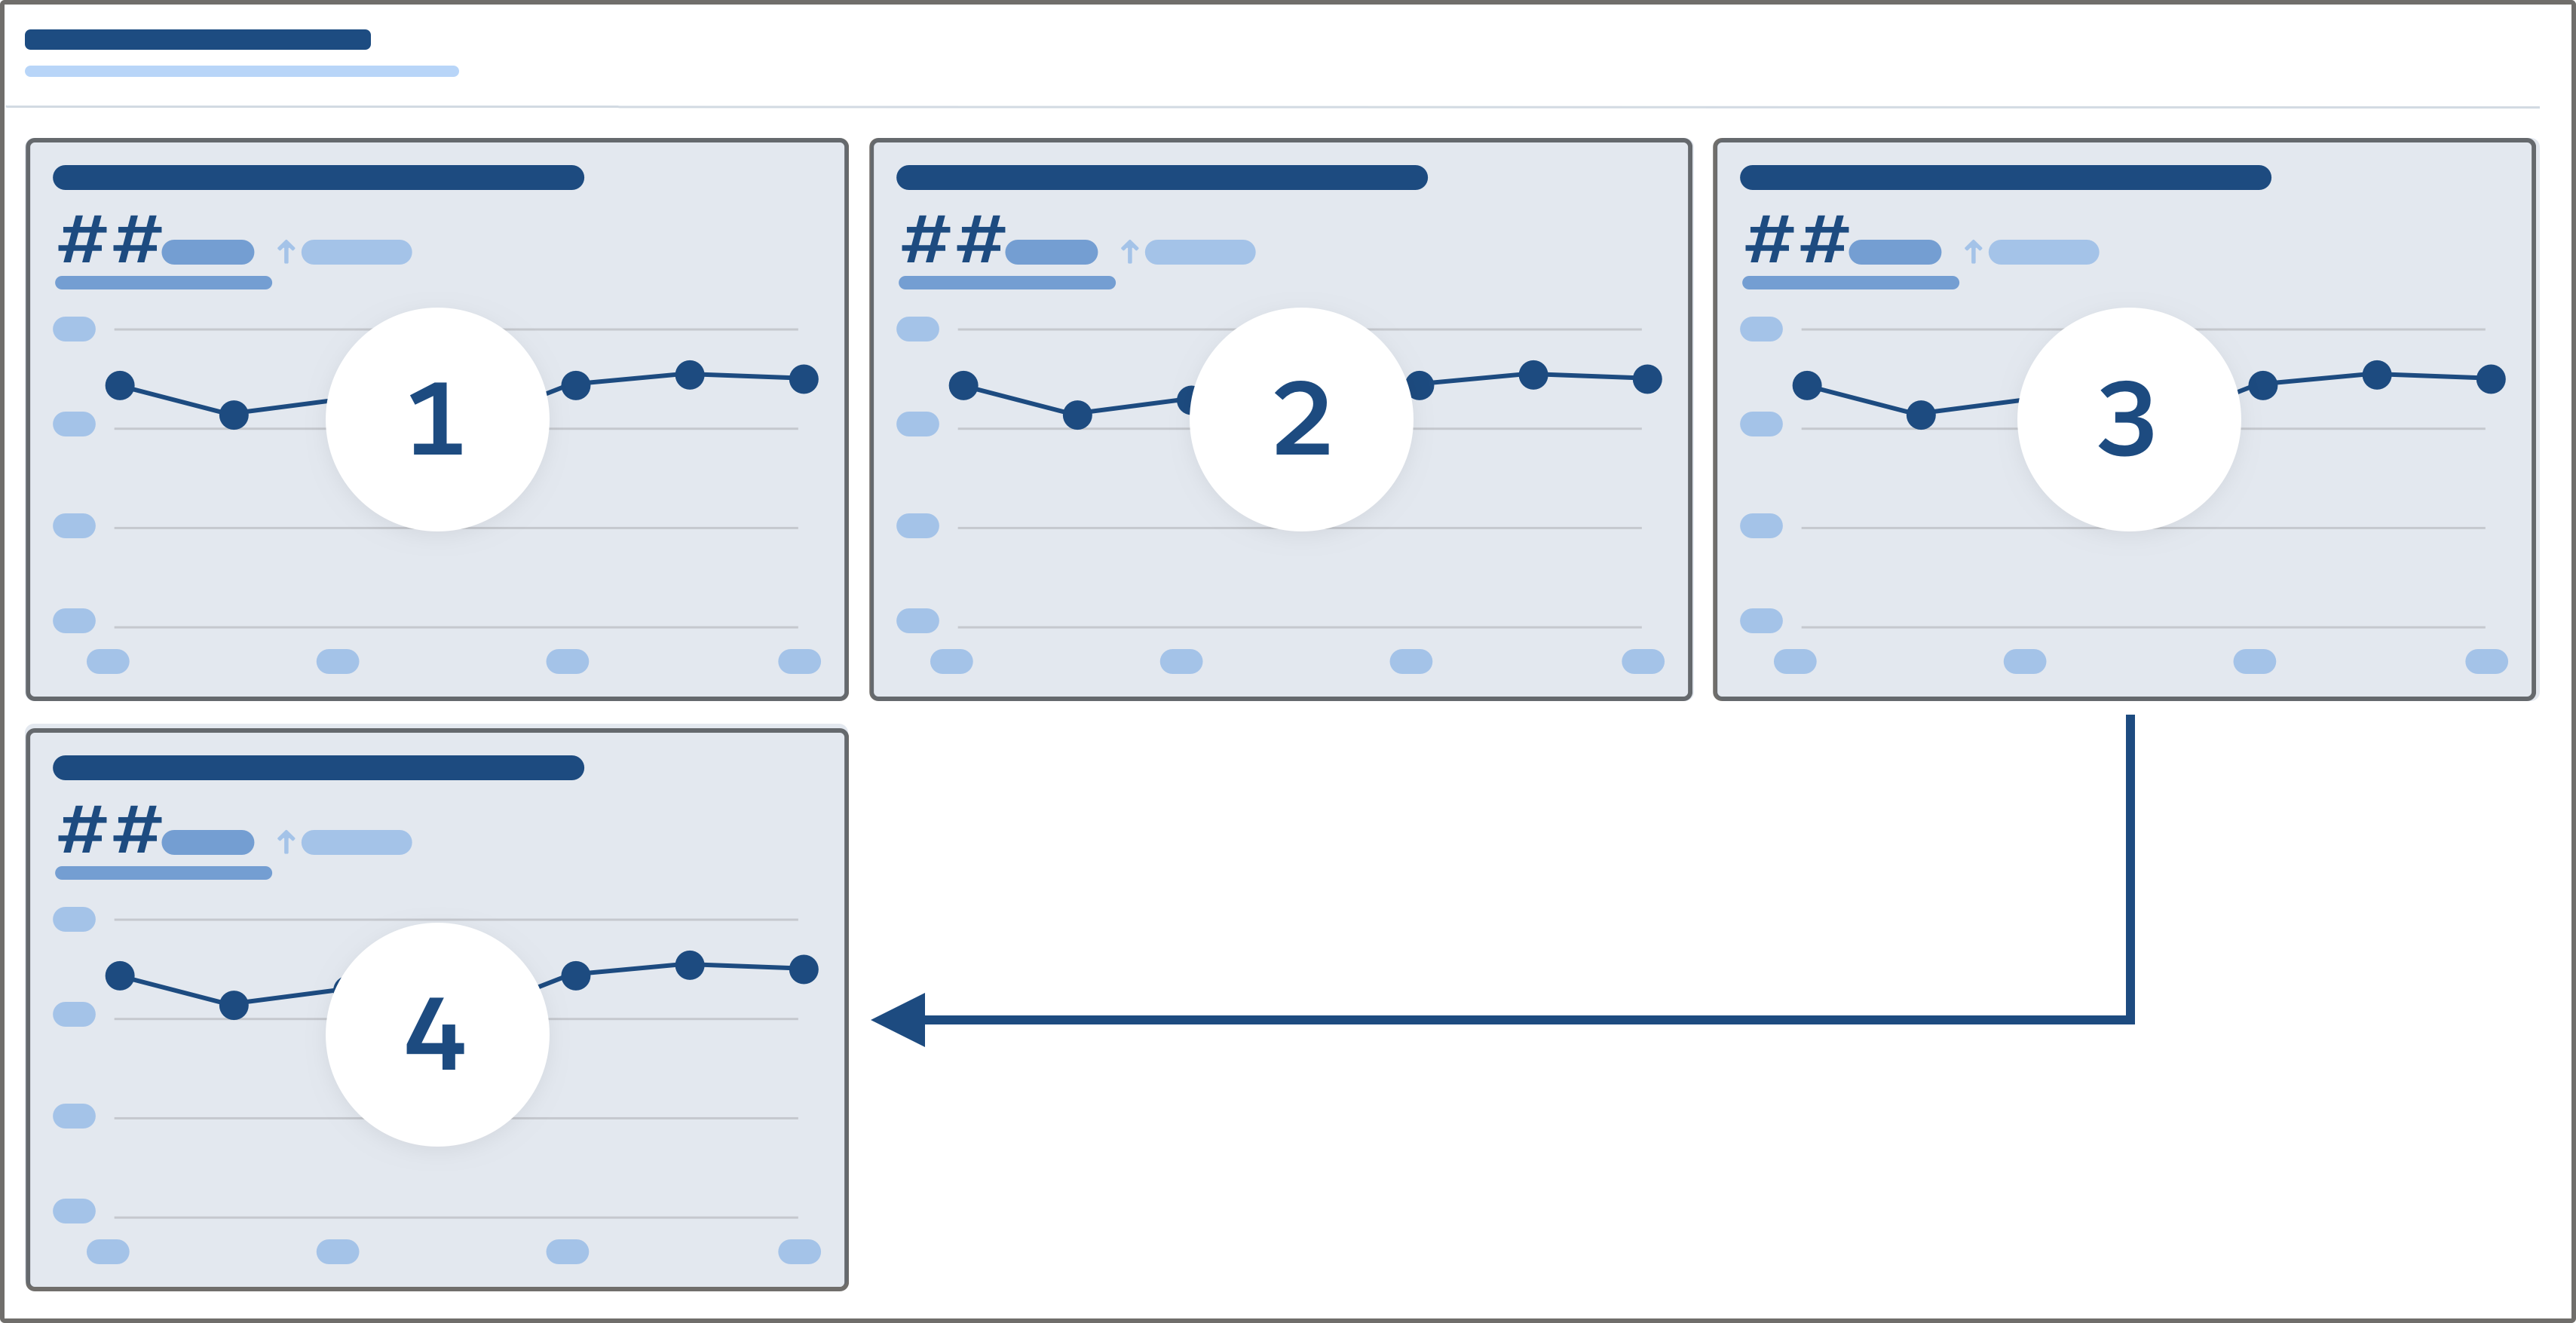 A responsive dashboard layout with four metric tiles.